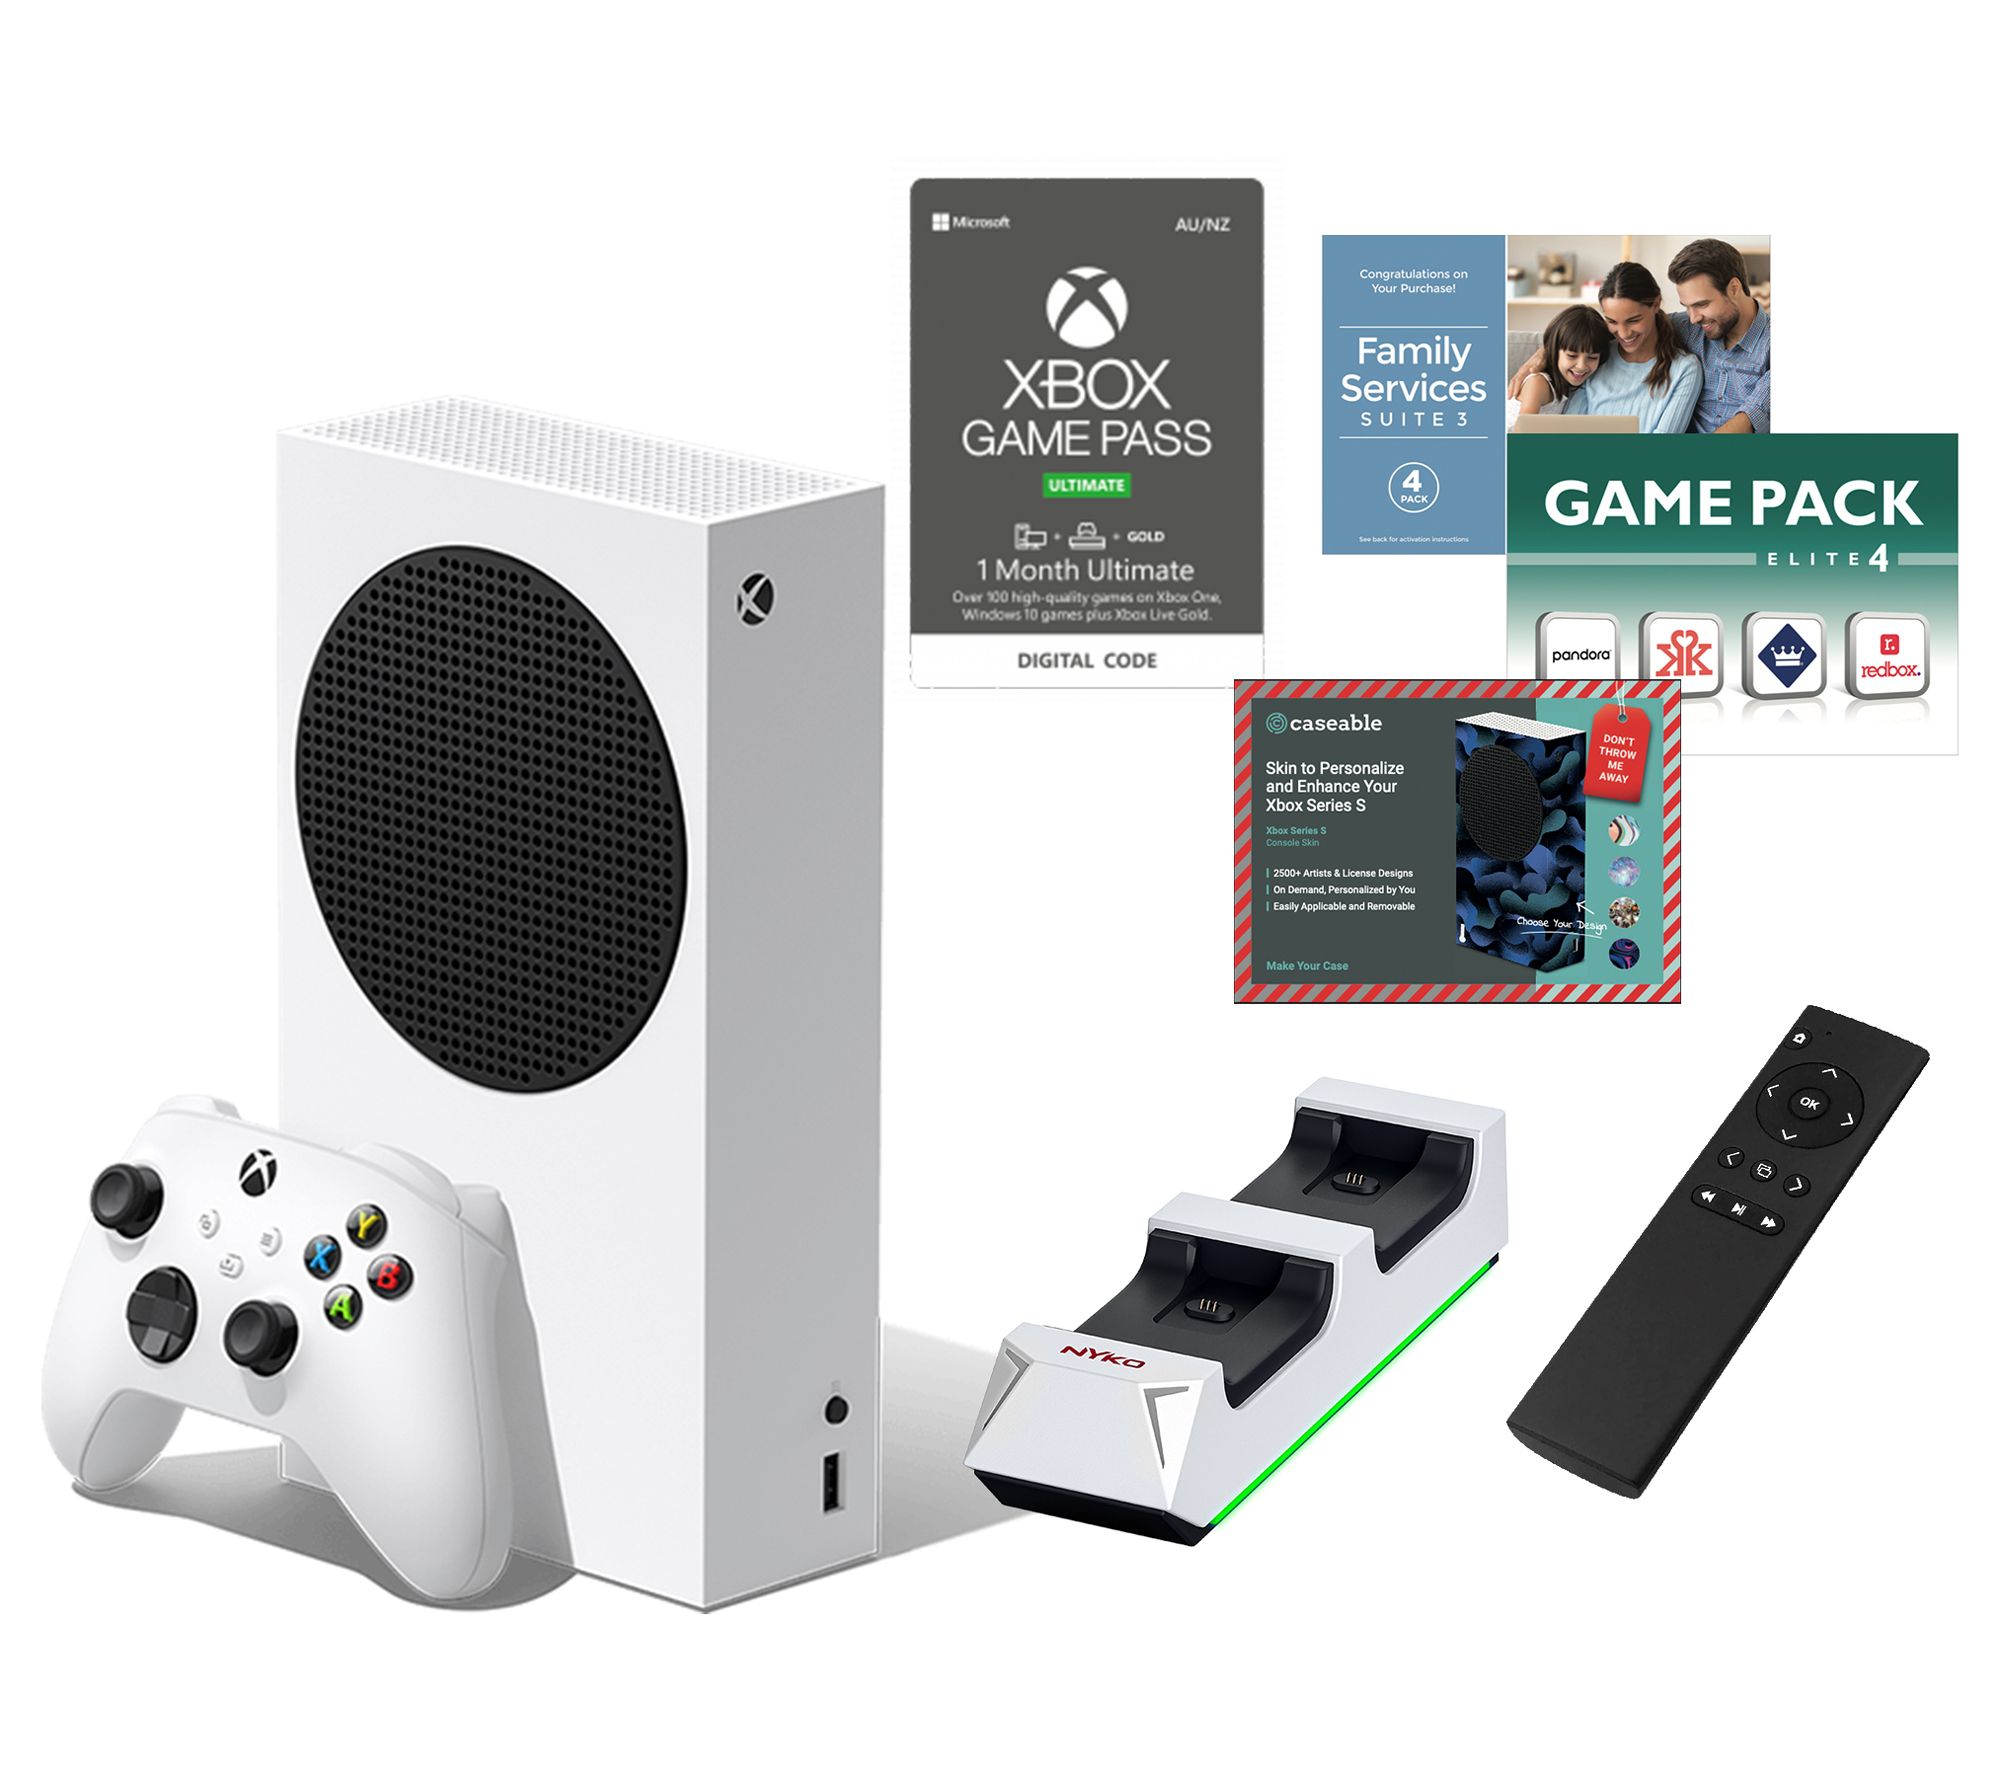 Xbox Series S w/ Gamepass, Dual Charger, and Ac cessories - QVC.com